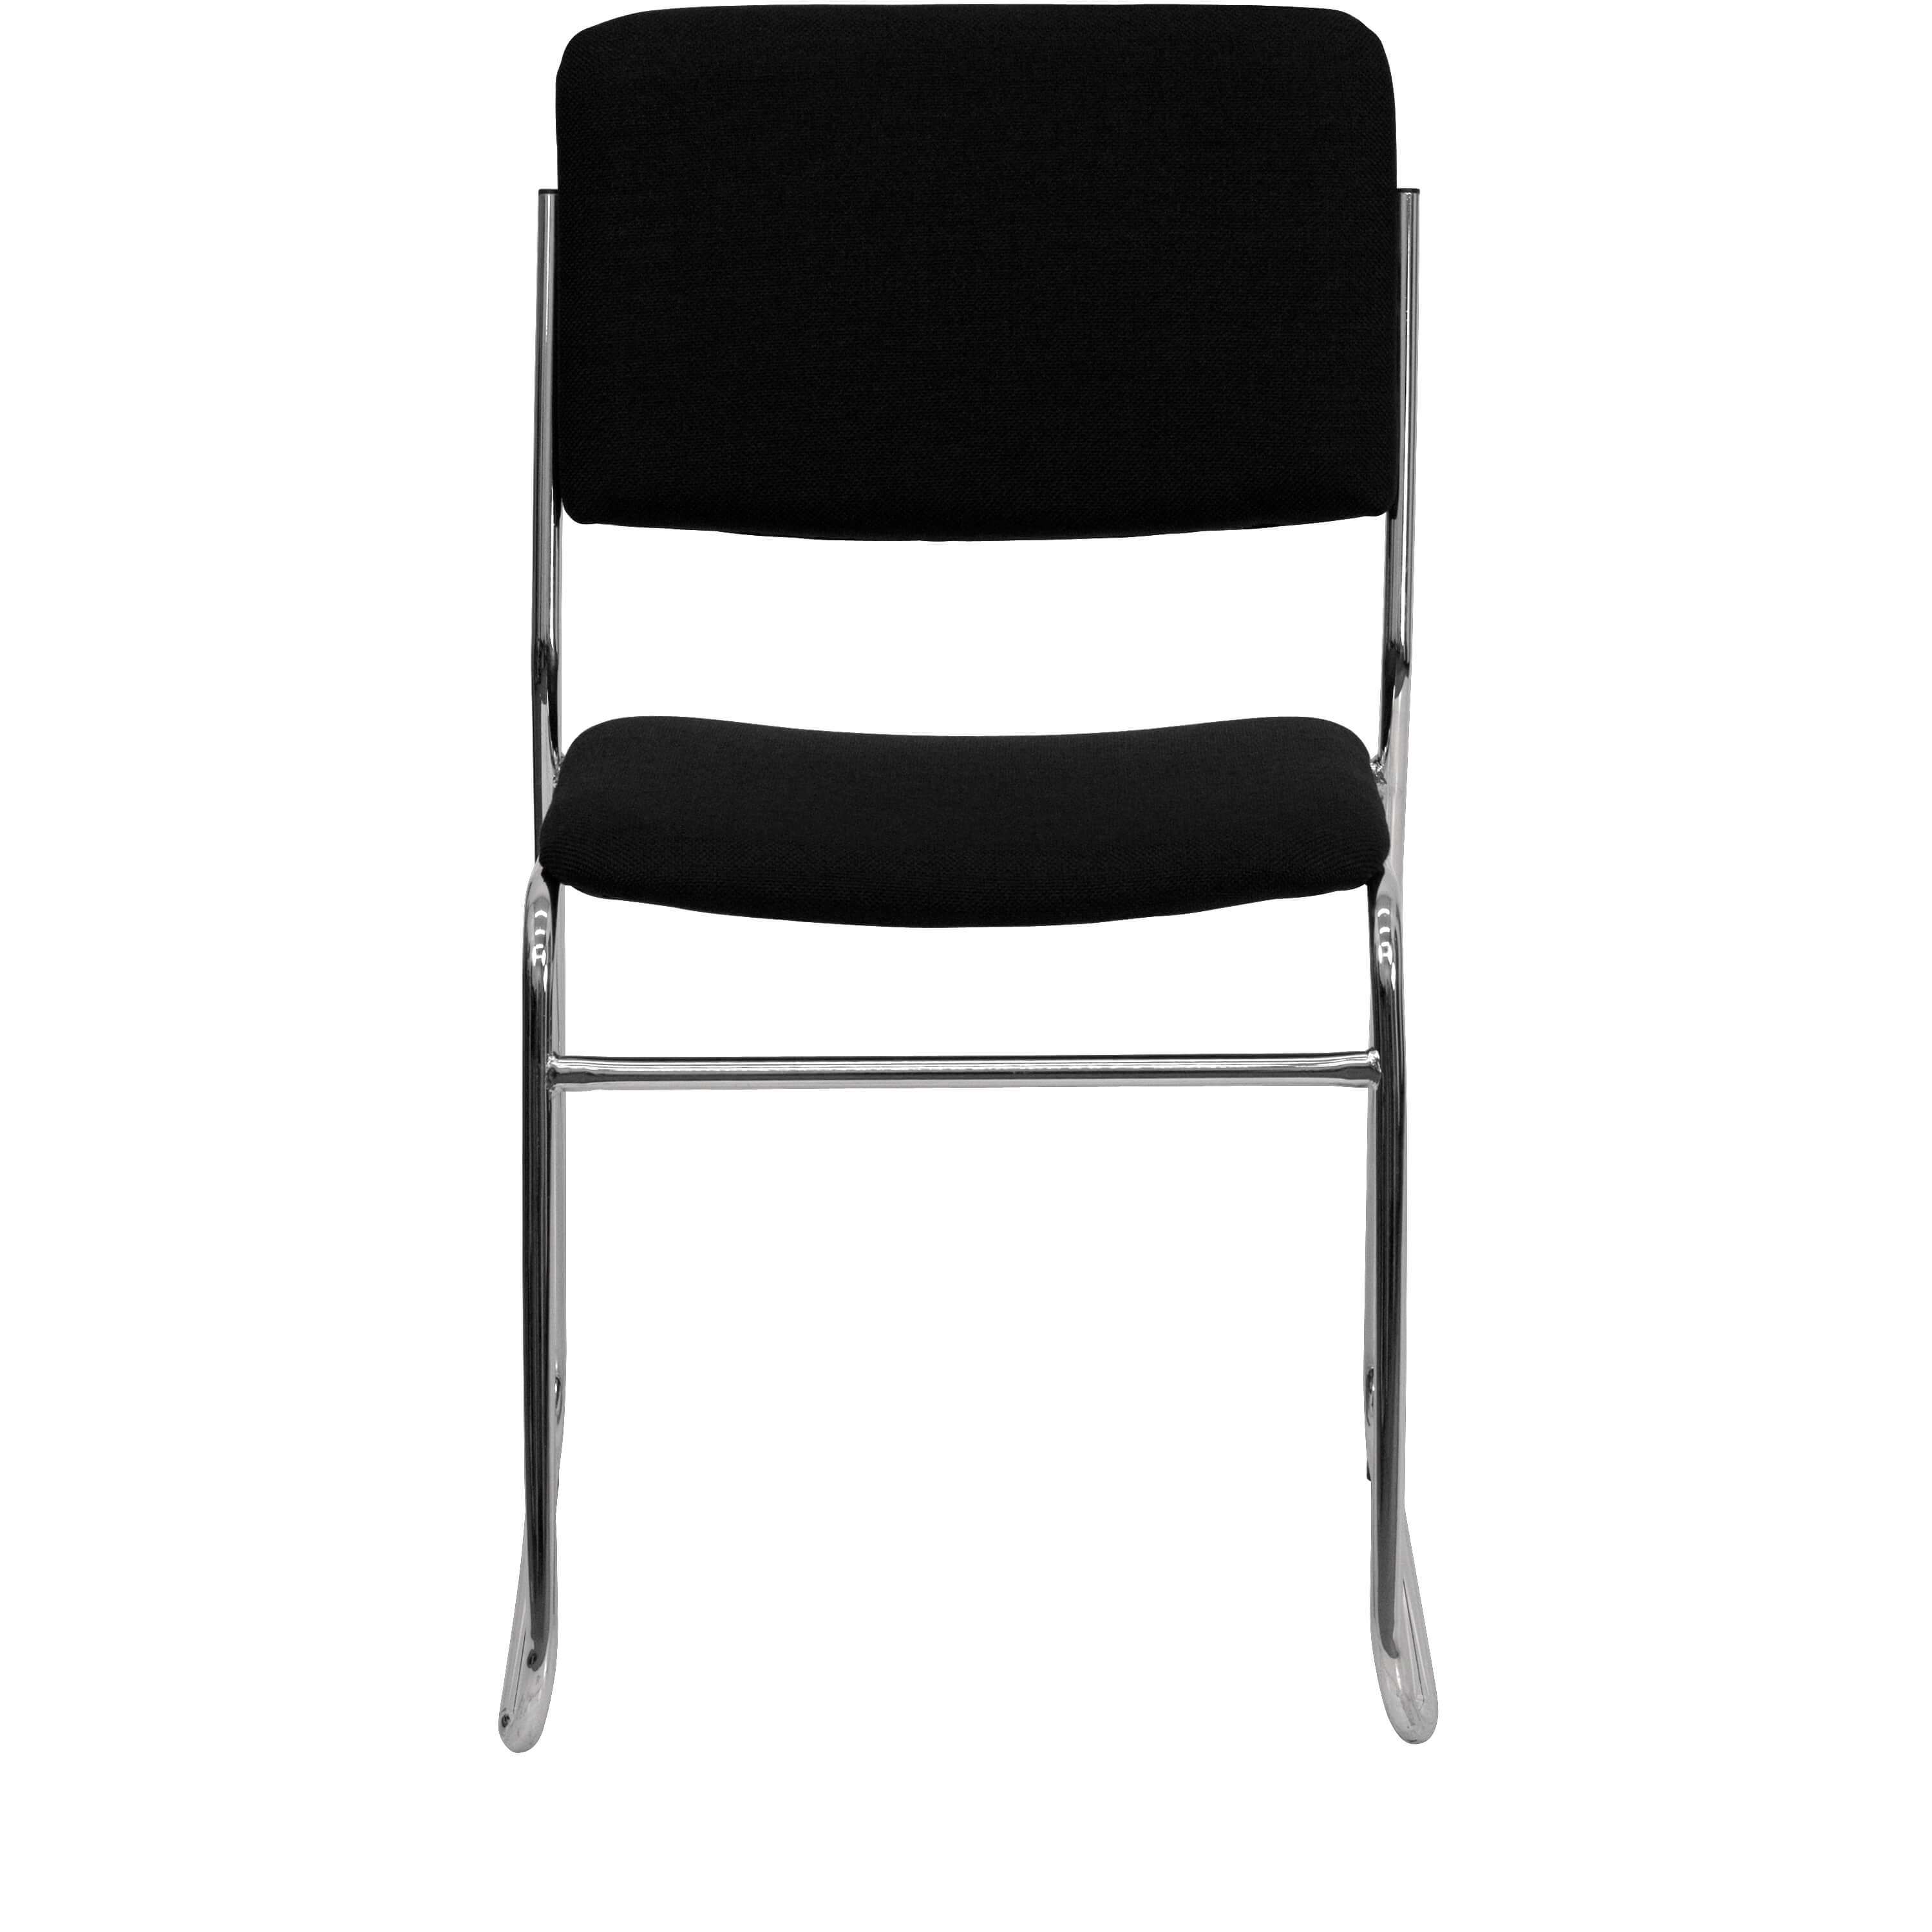 Chairs for office visitors